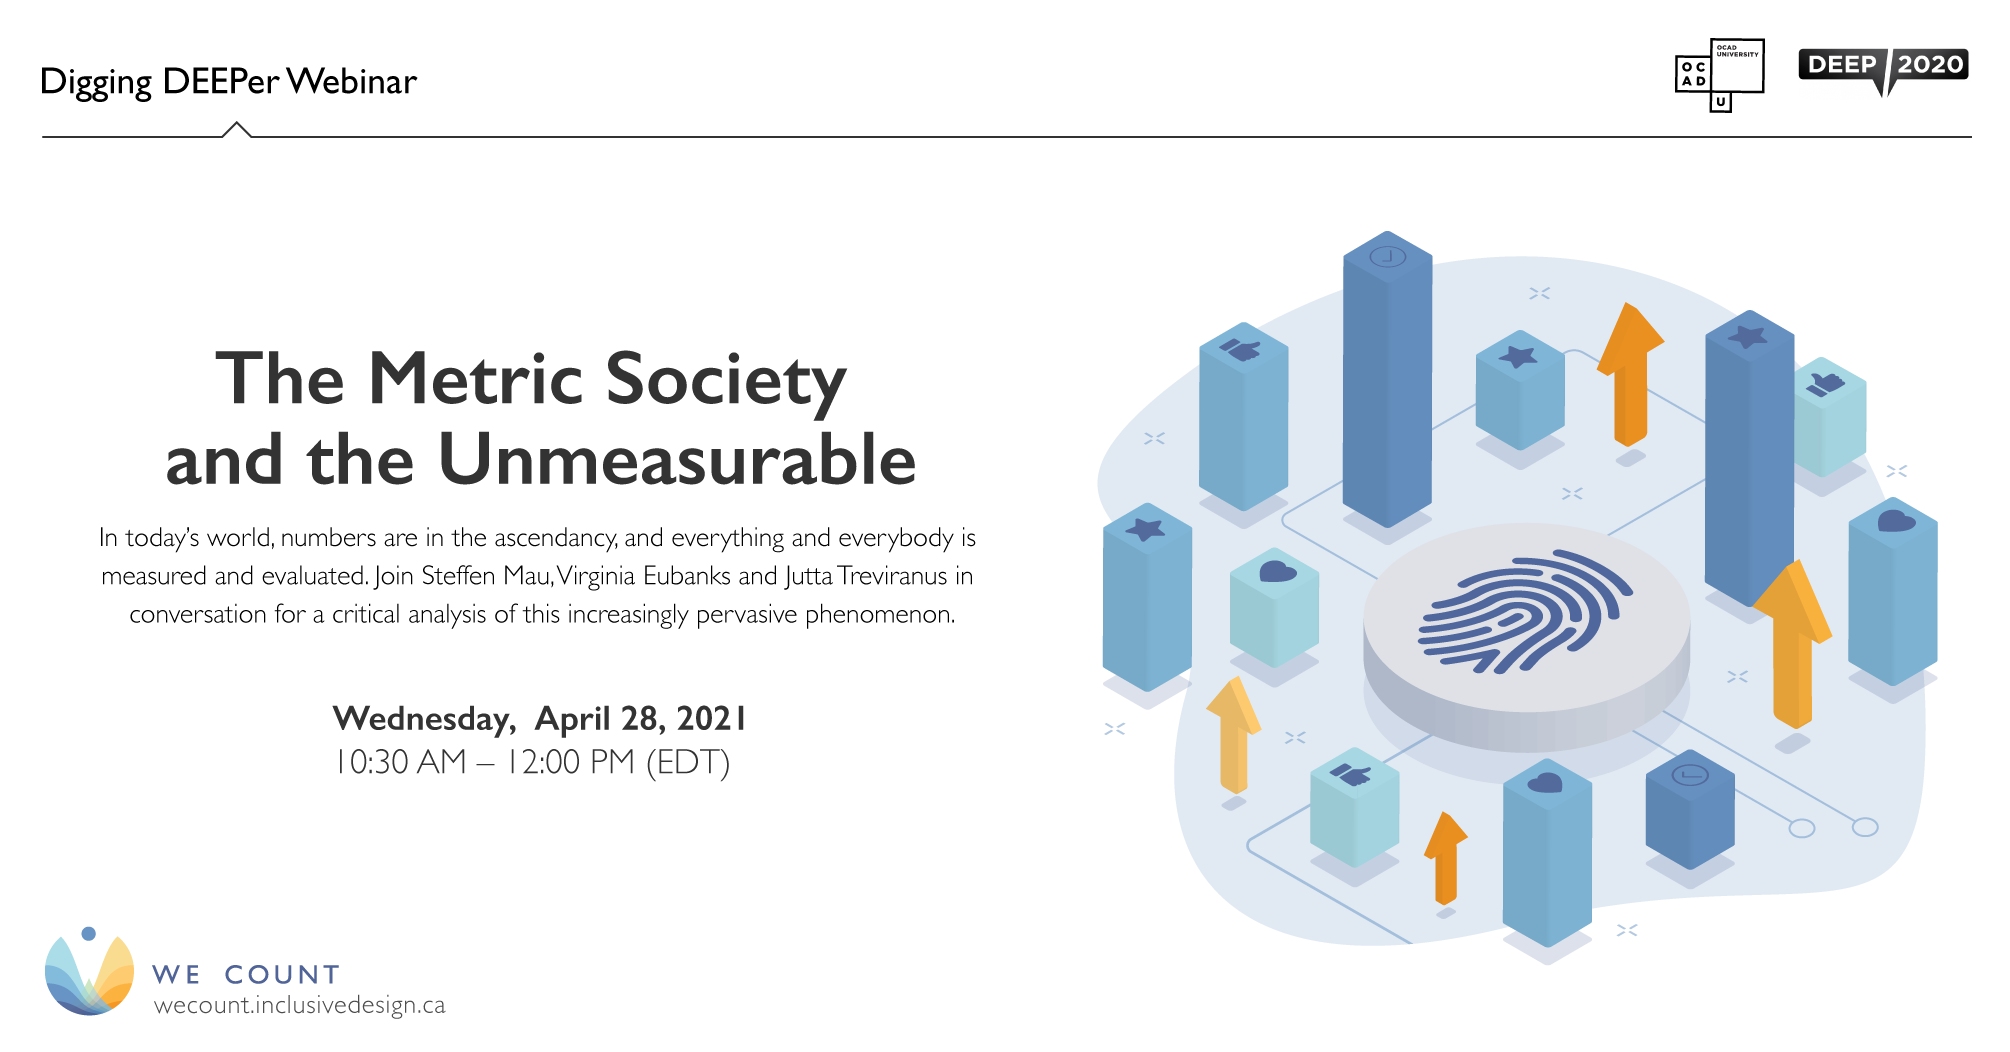 Digging DEEPer Webinar The Metric Society and the Unmeasurable: Wednesday, April 28, 2021, 10:30 AM – 12:00 PM (EDT)